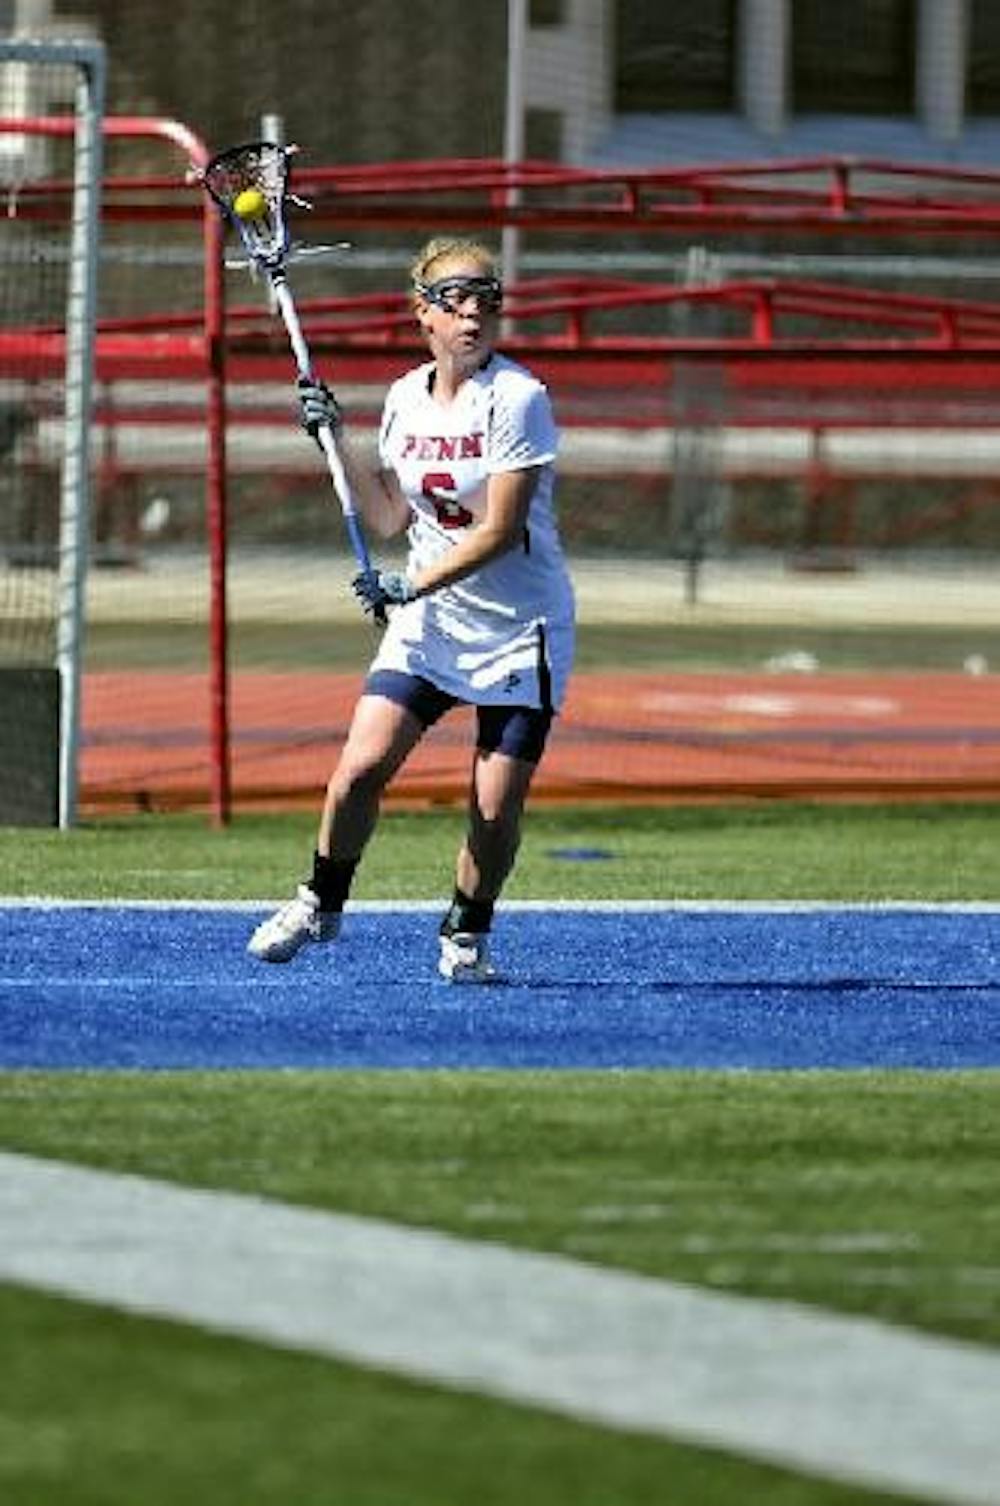 Senior Tory Bensen helped Penn defeat Harvard with a four-goal performance, yet none of her goals were bigger than her last, which came in double overtime to give Penn a 10-9 victory.